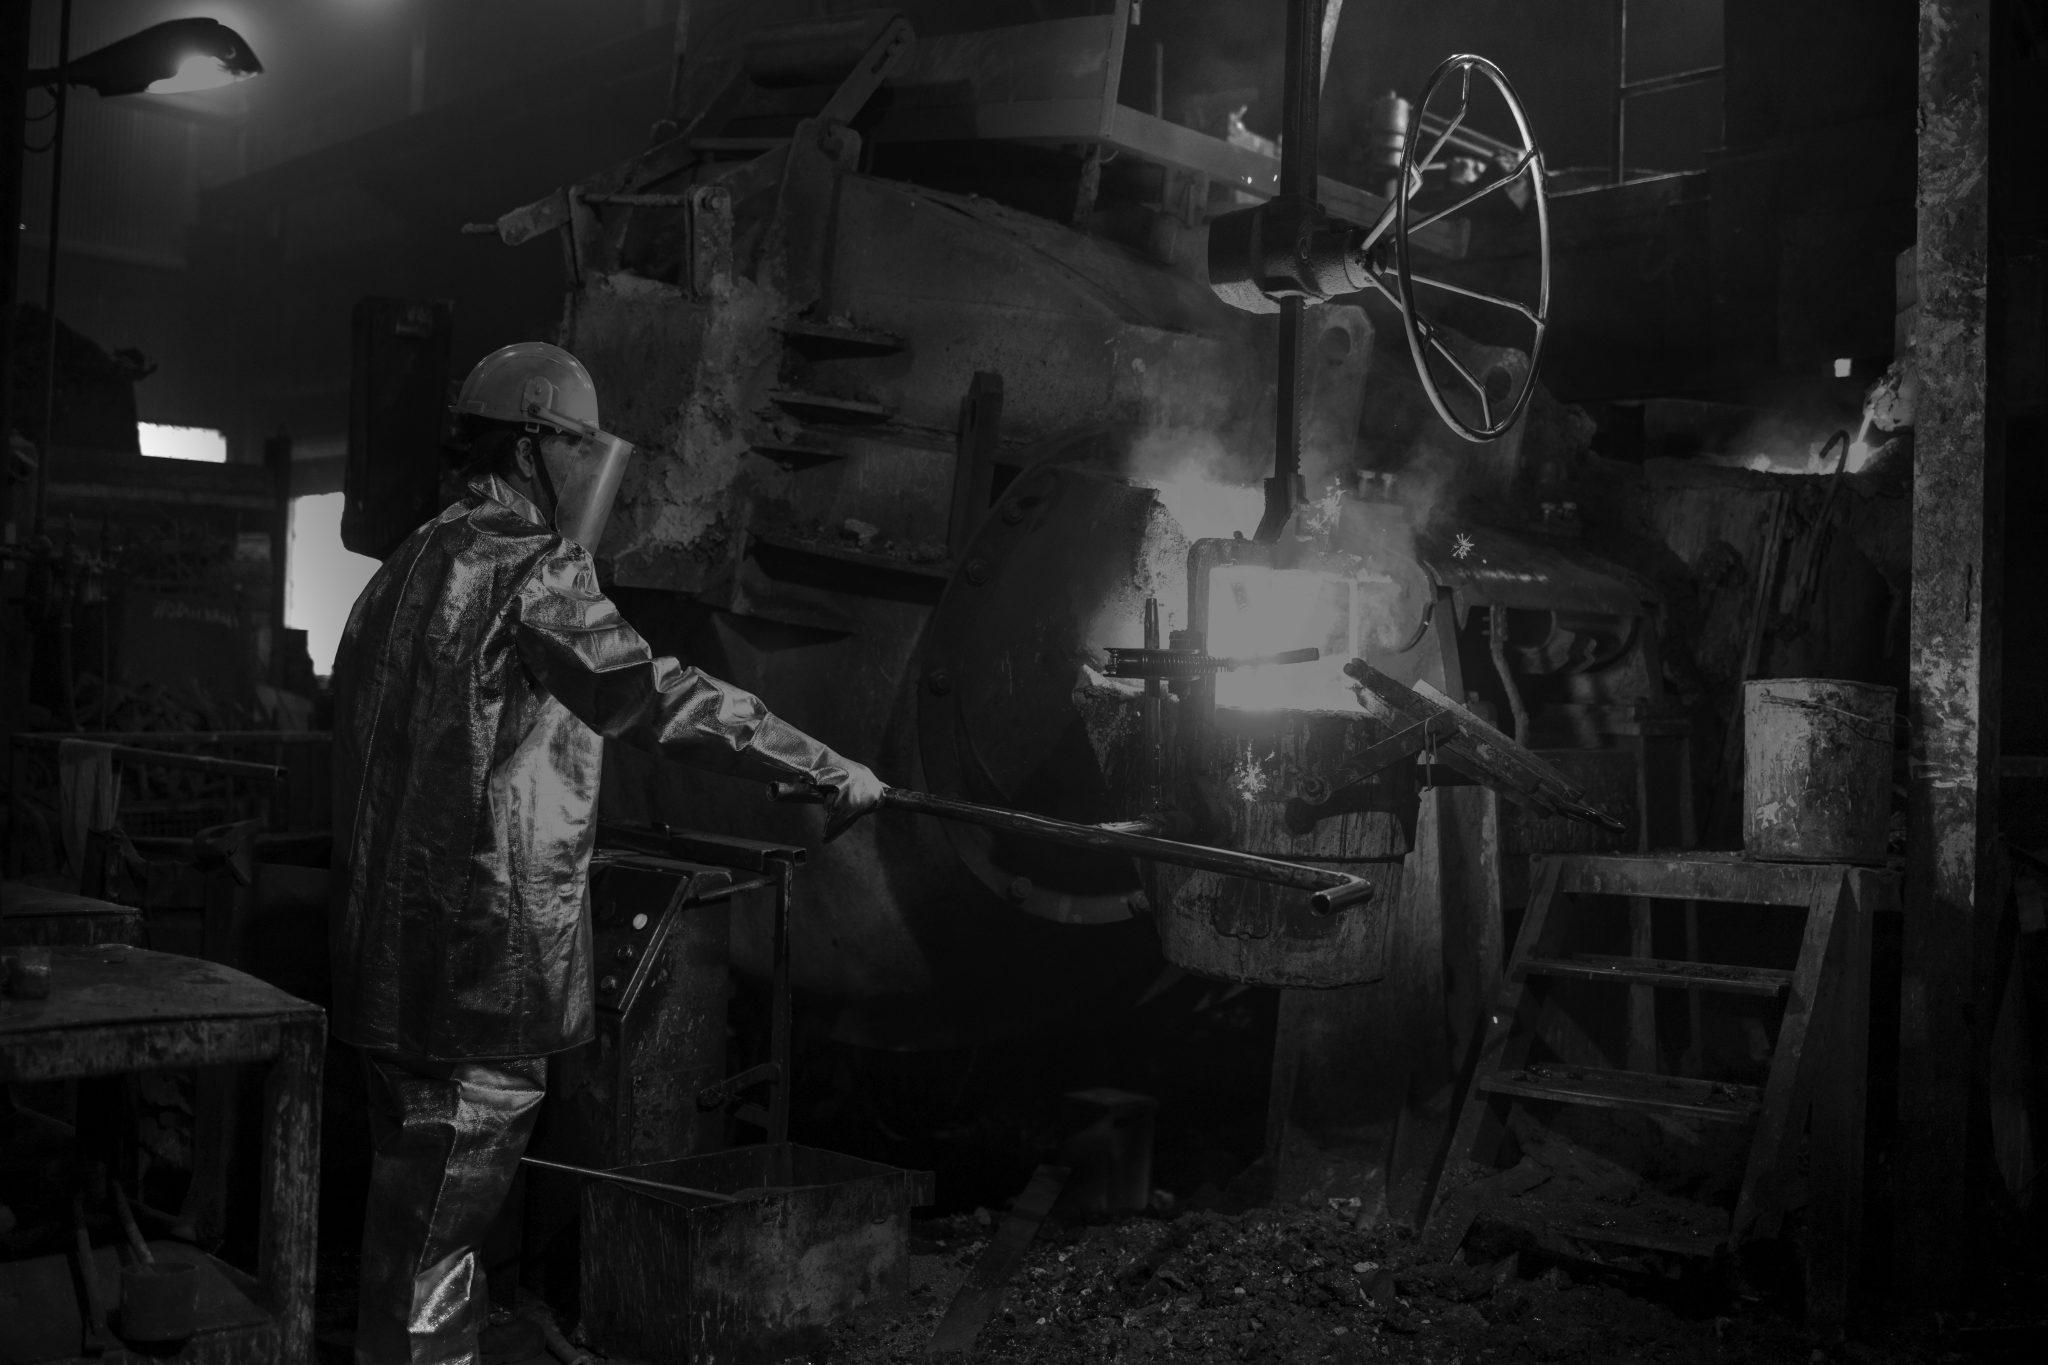 Hardworking in foundry. Workman in temperature protection suit pouring liquid metal into the bucket. Steel production.